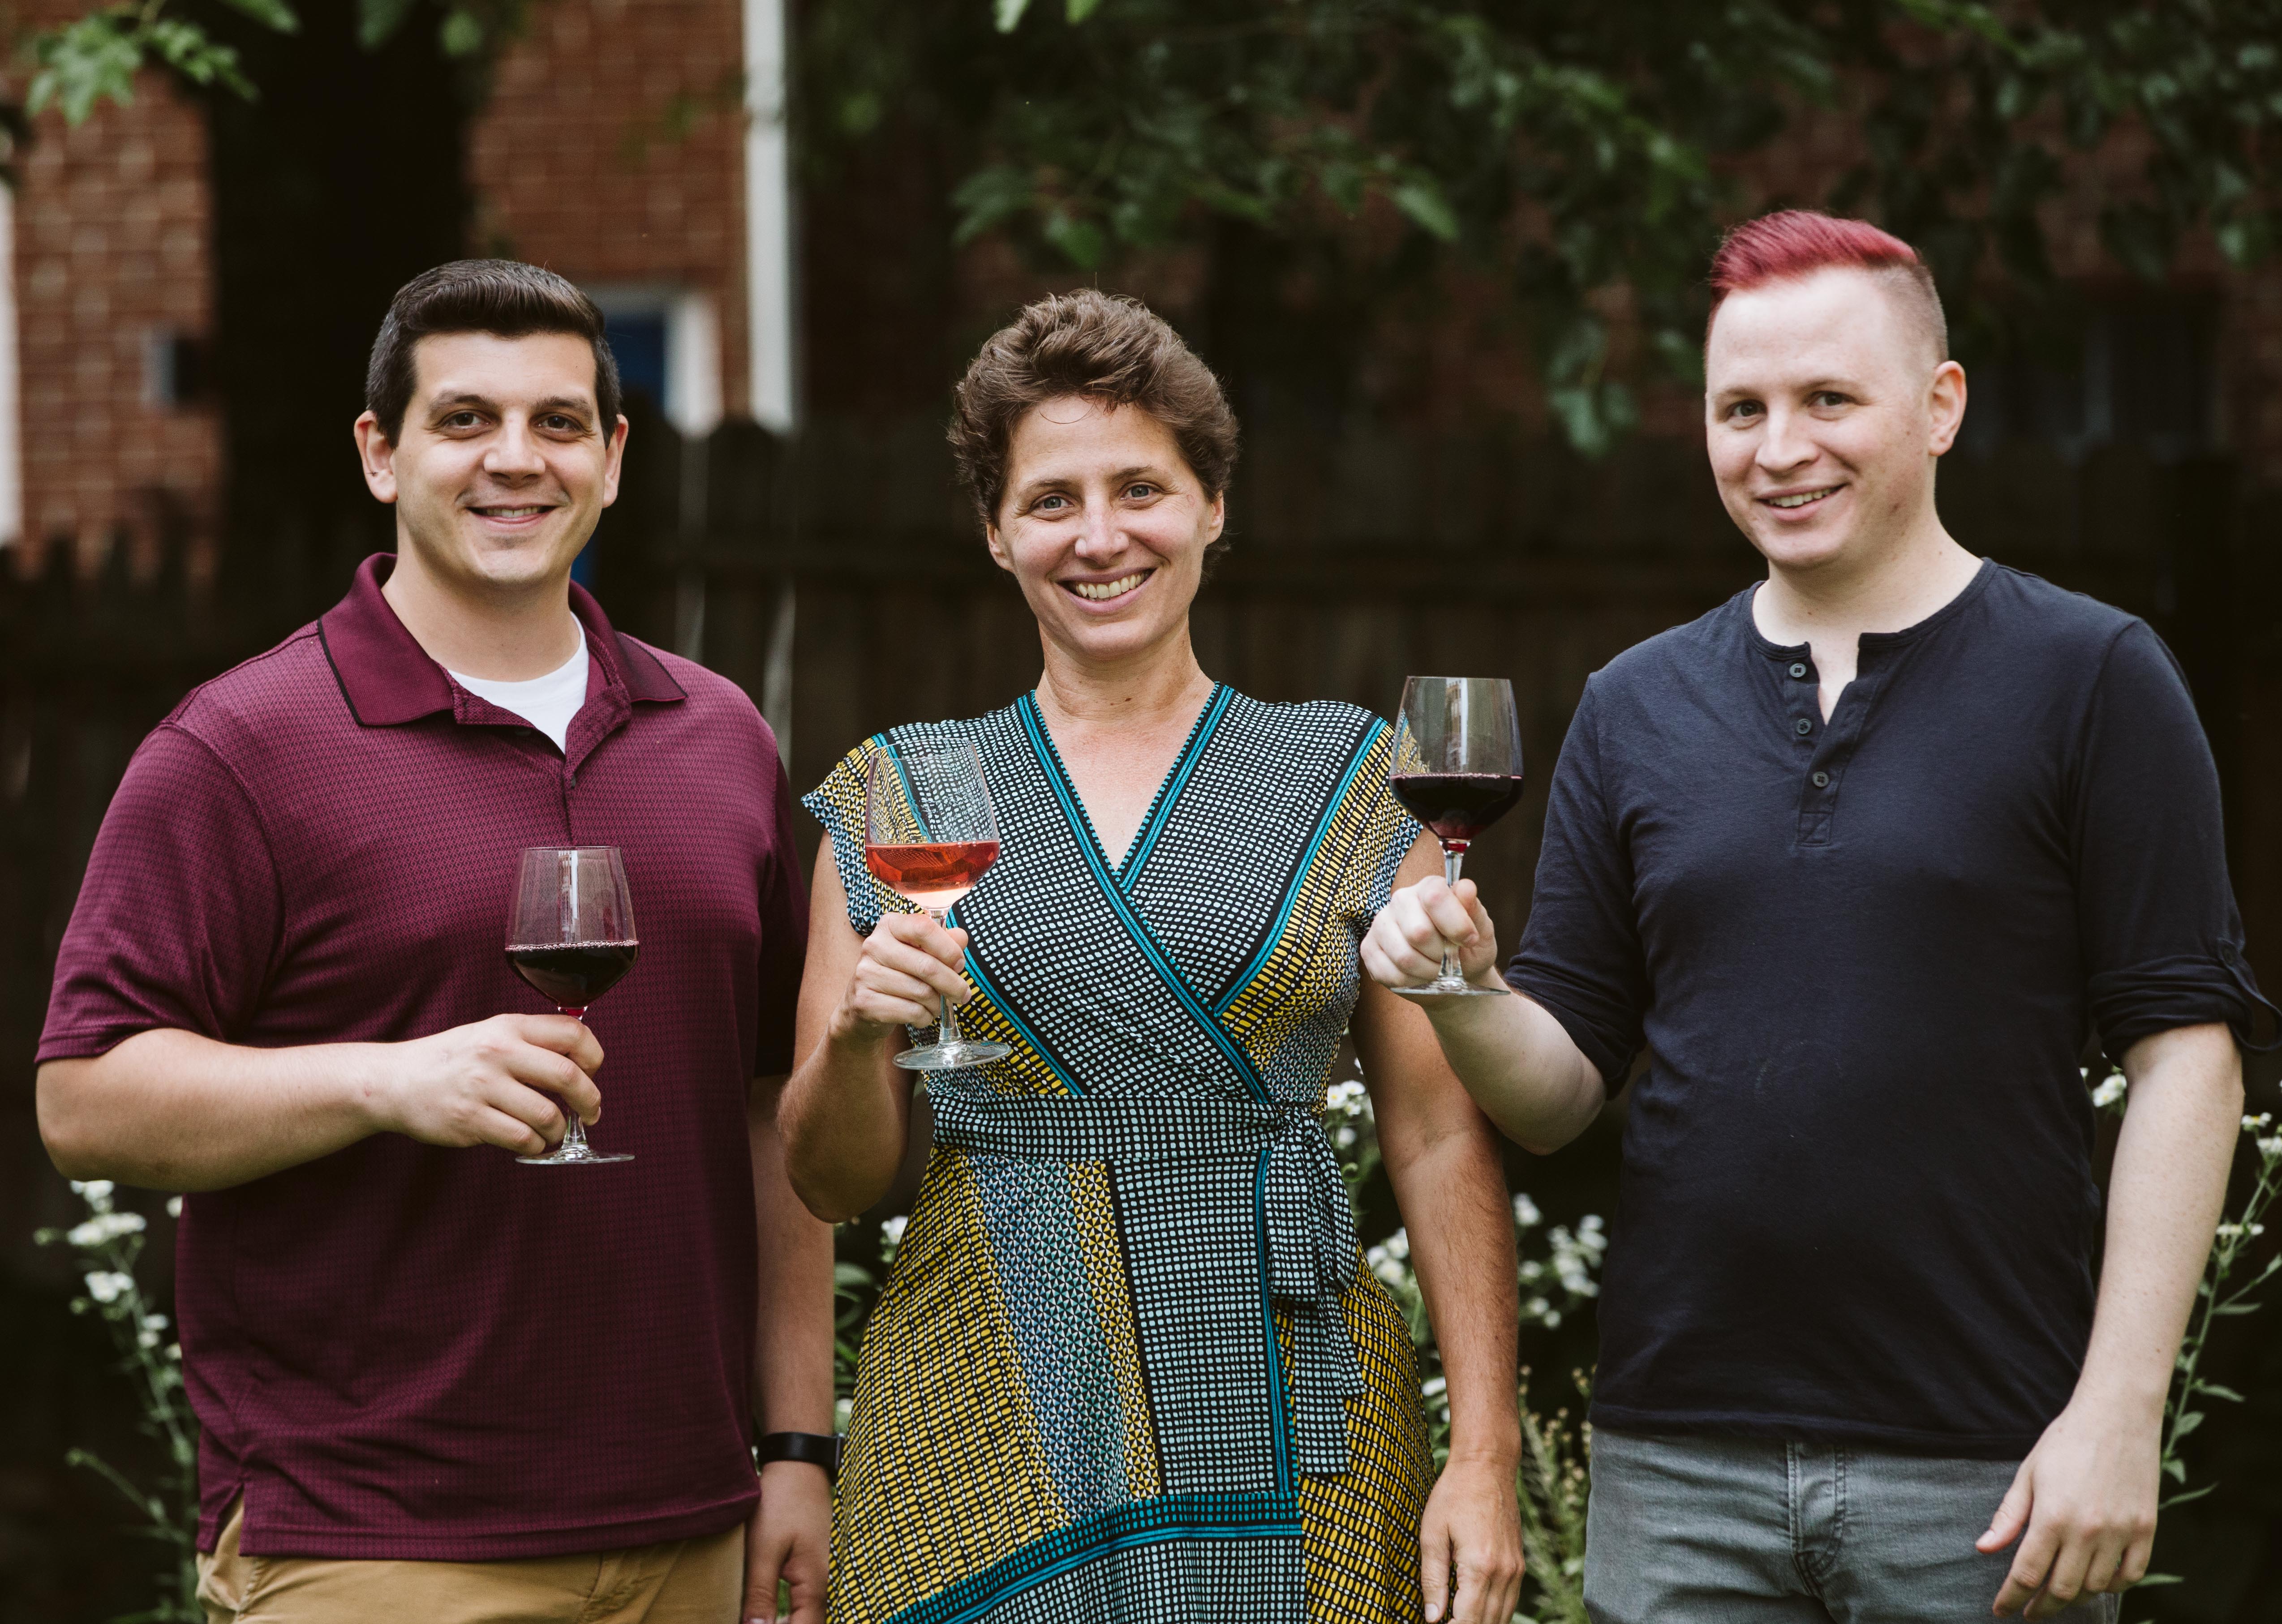 Major Expansion News: Sojourn Philly to open Jet Wine Garden